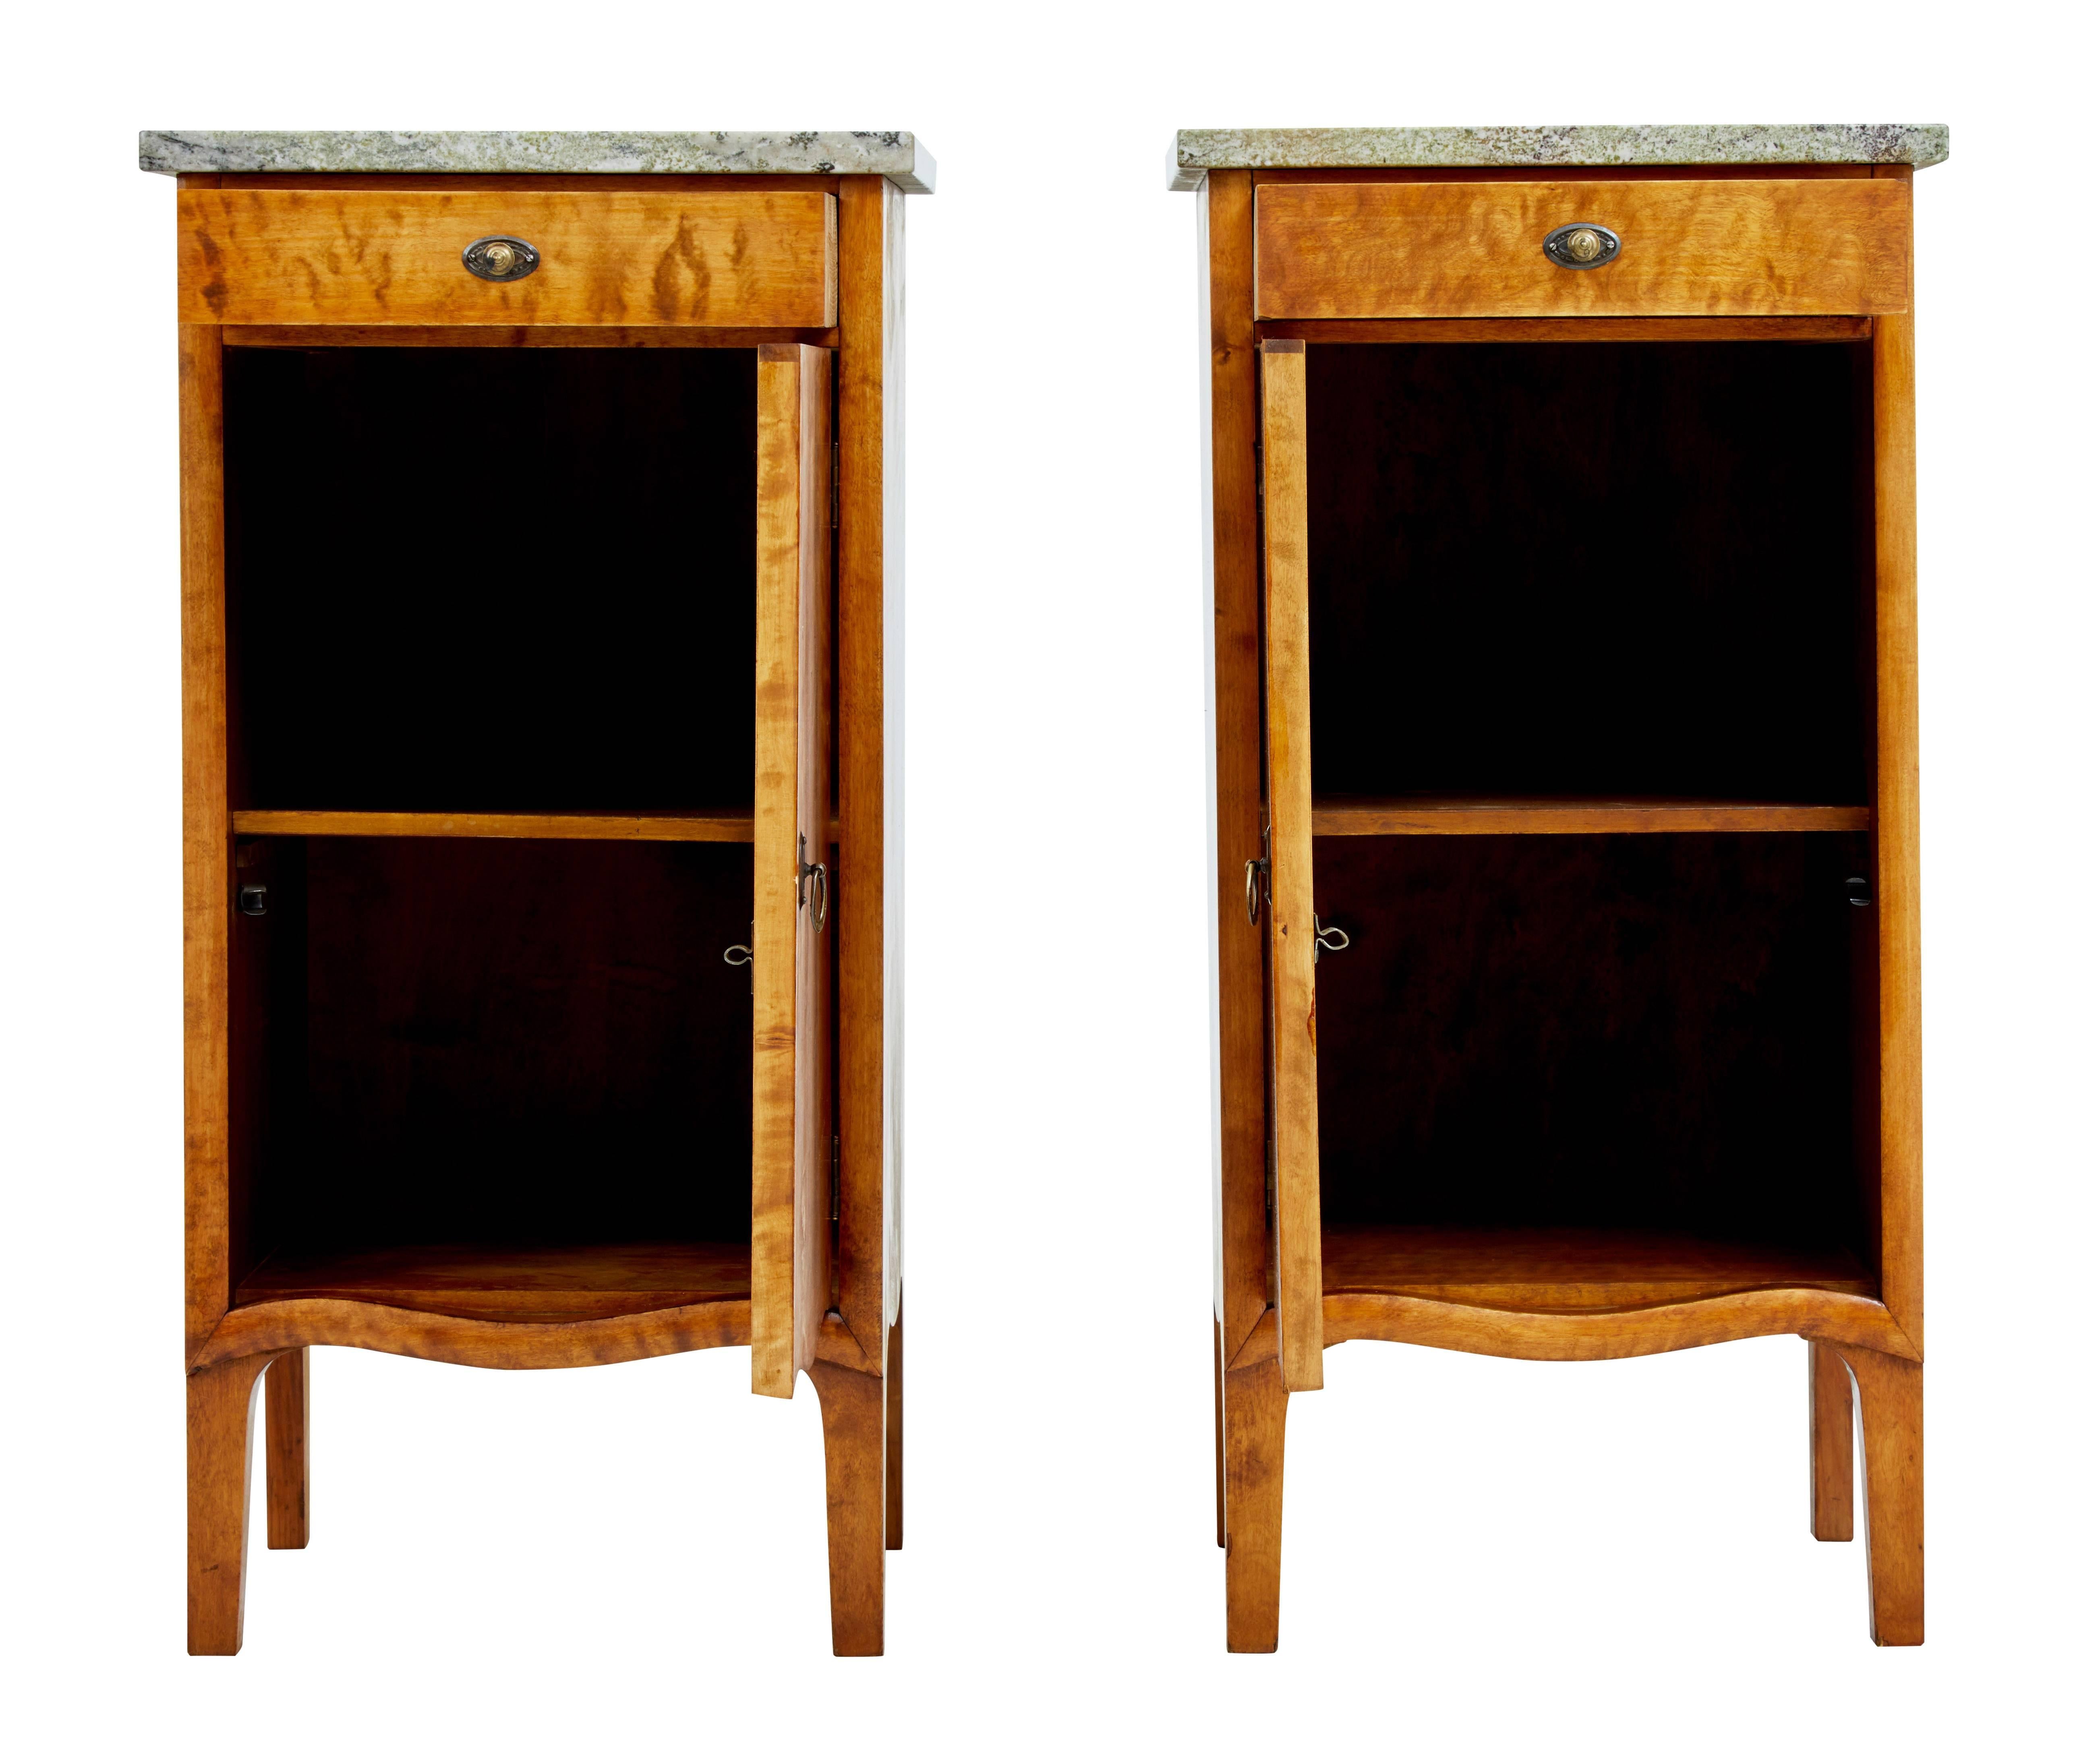 Pair of birch bedside cupboards, circa 1910.

With inlaid cartouche to the front door and slight curving to the legs, hint at a touch of Art Nouveau styling.

Single drawer to the top, with single door opening to a shelf. Granite marble tops